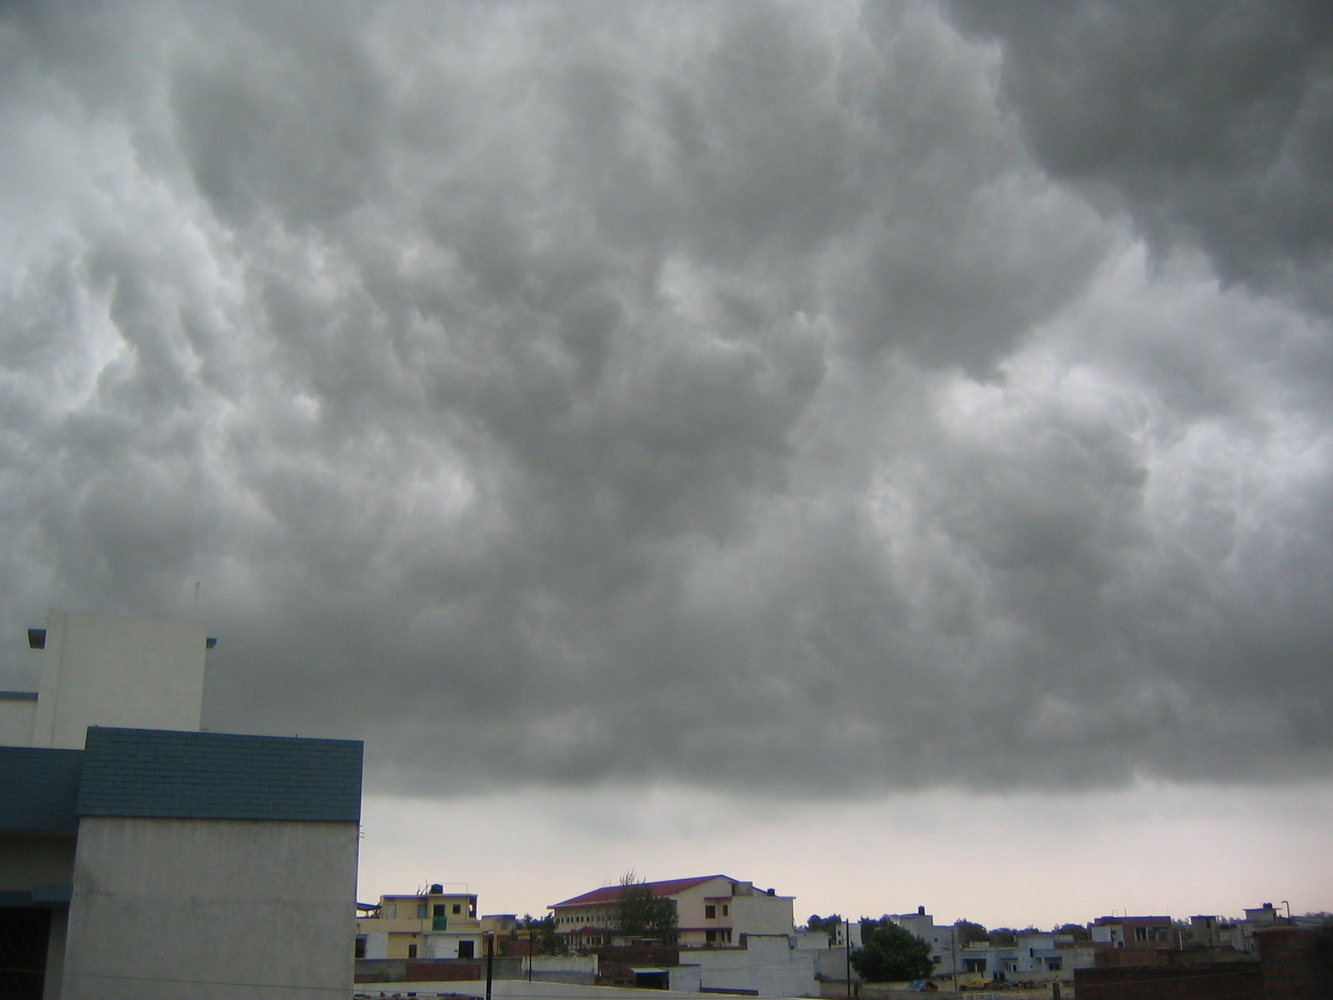 A photo of dark stormy monsoon clouds over the city of Lucknow,India.